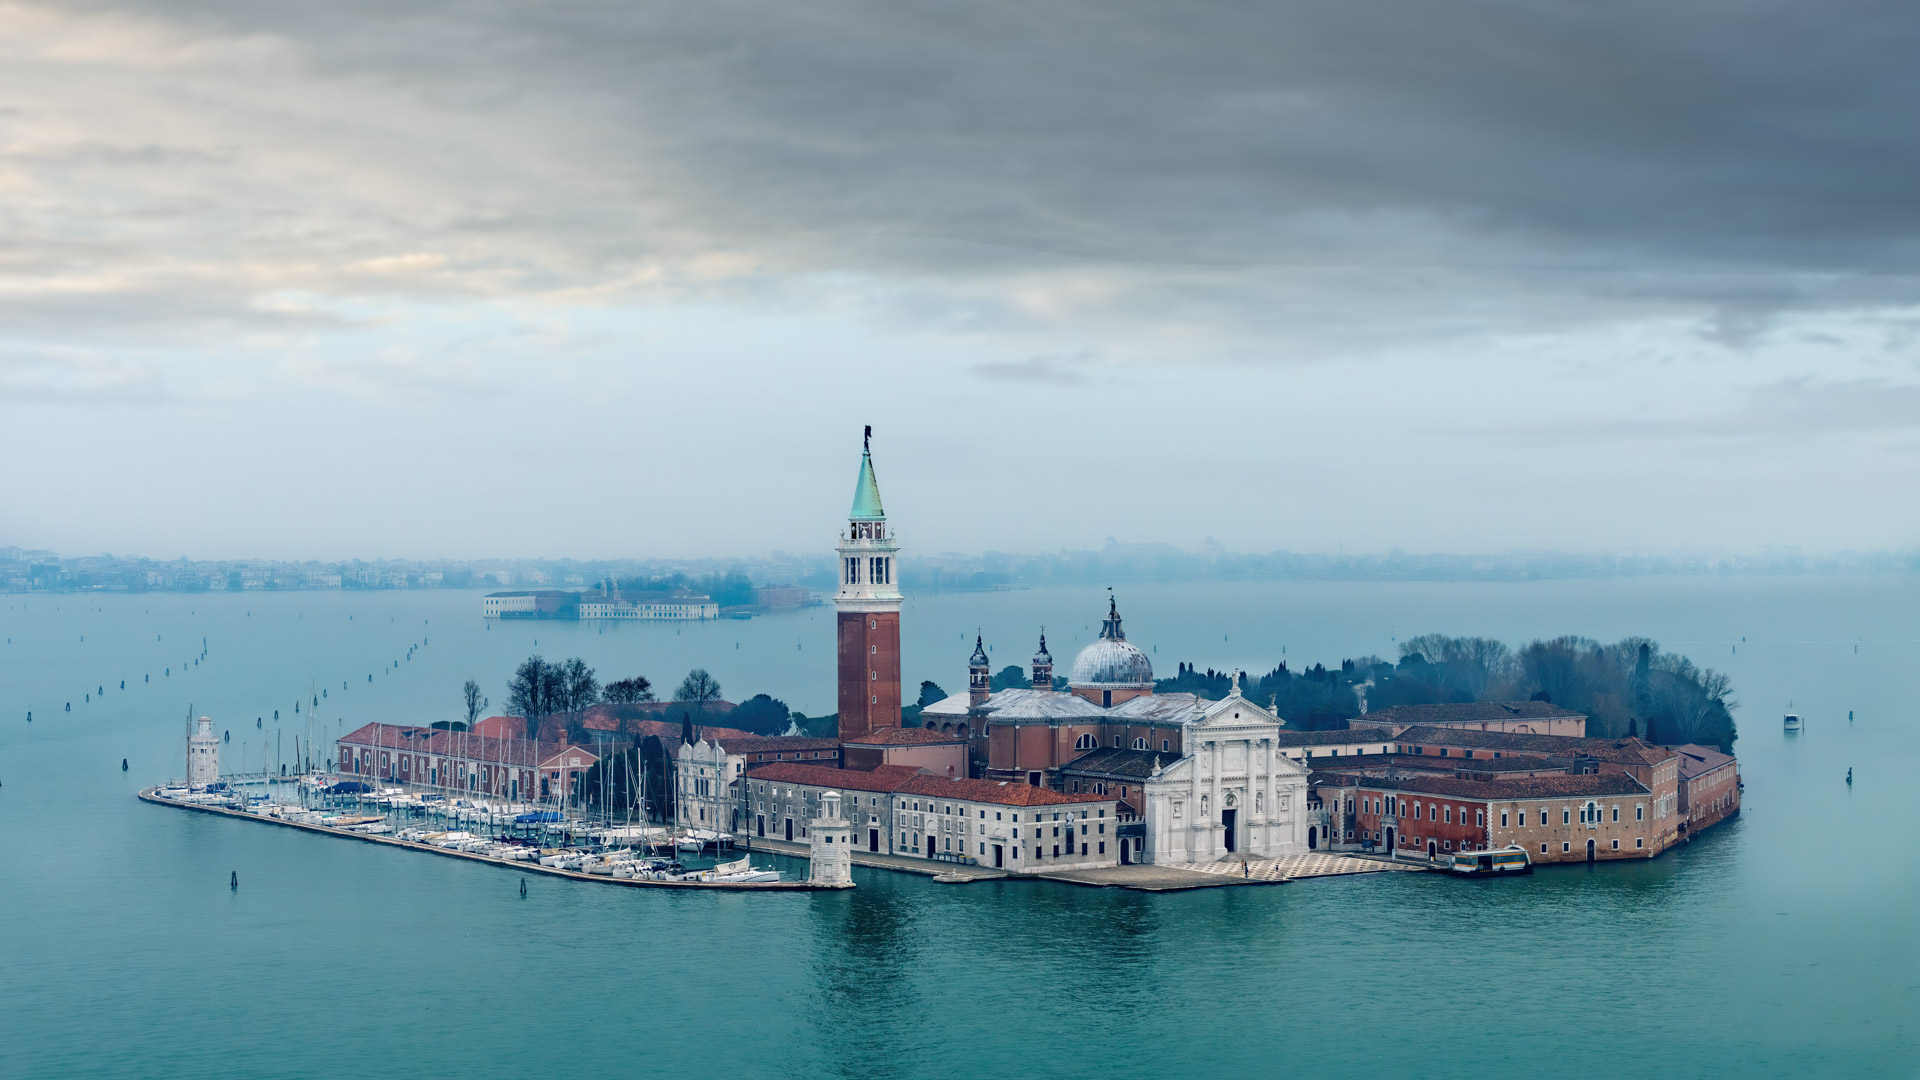 Immerse yourself in the charm of Venice with our wallpaper featuring the iconic canals, gondolas, and islands.